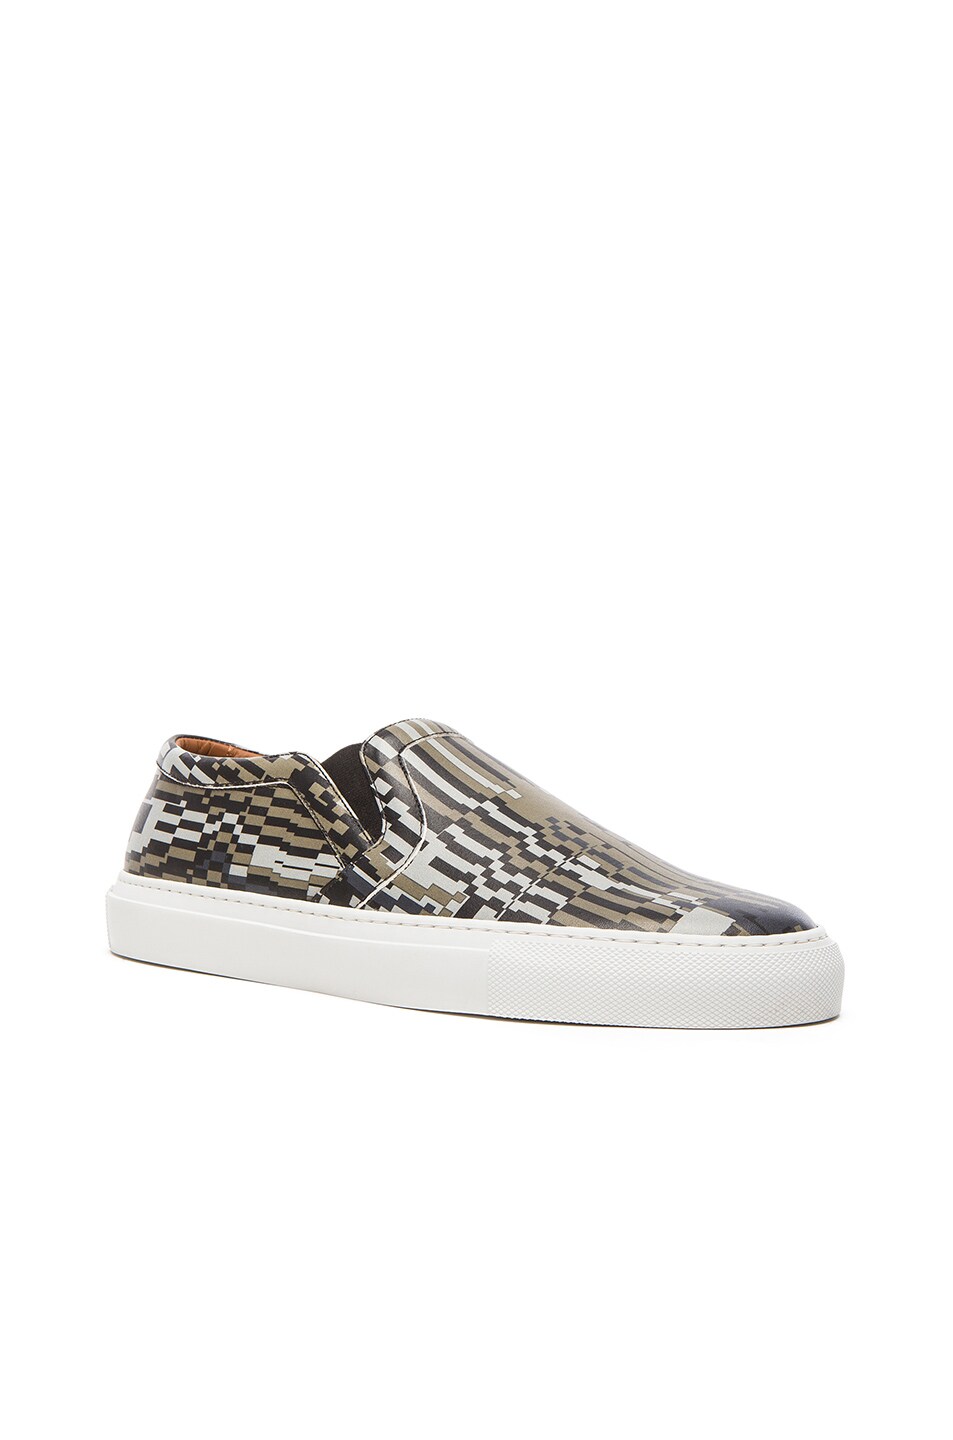 Image 1 of Givenchy Printed Street Skate Leather Sneakers in Multi